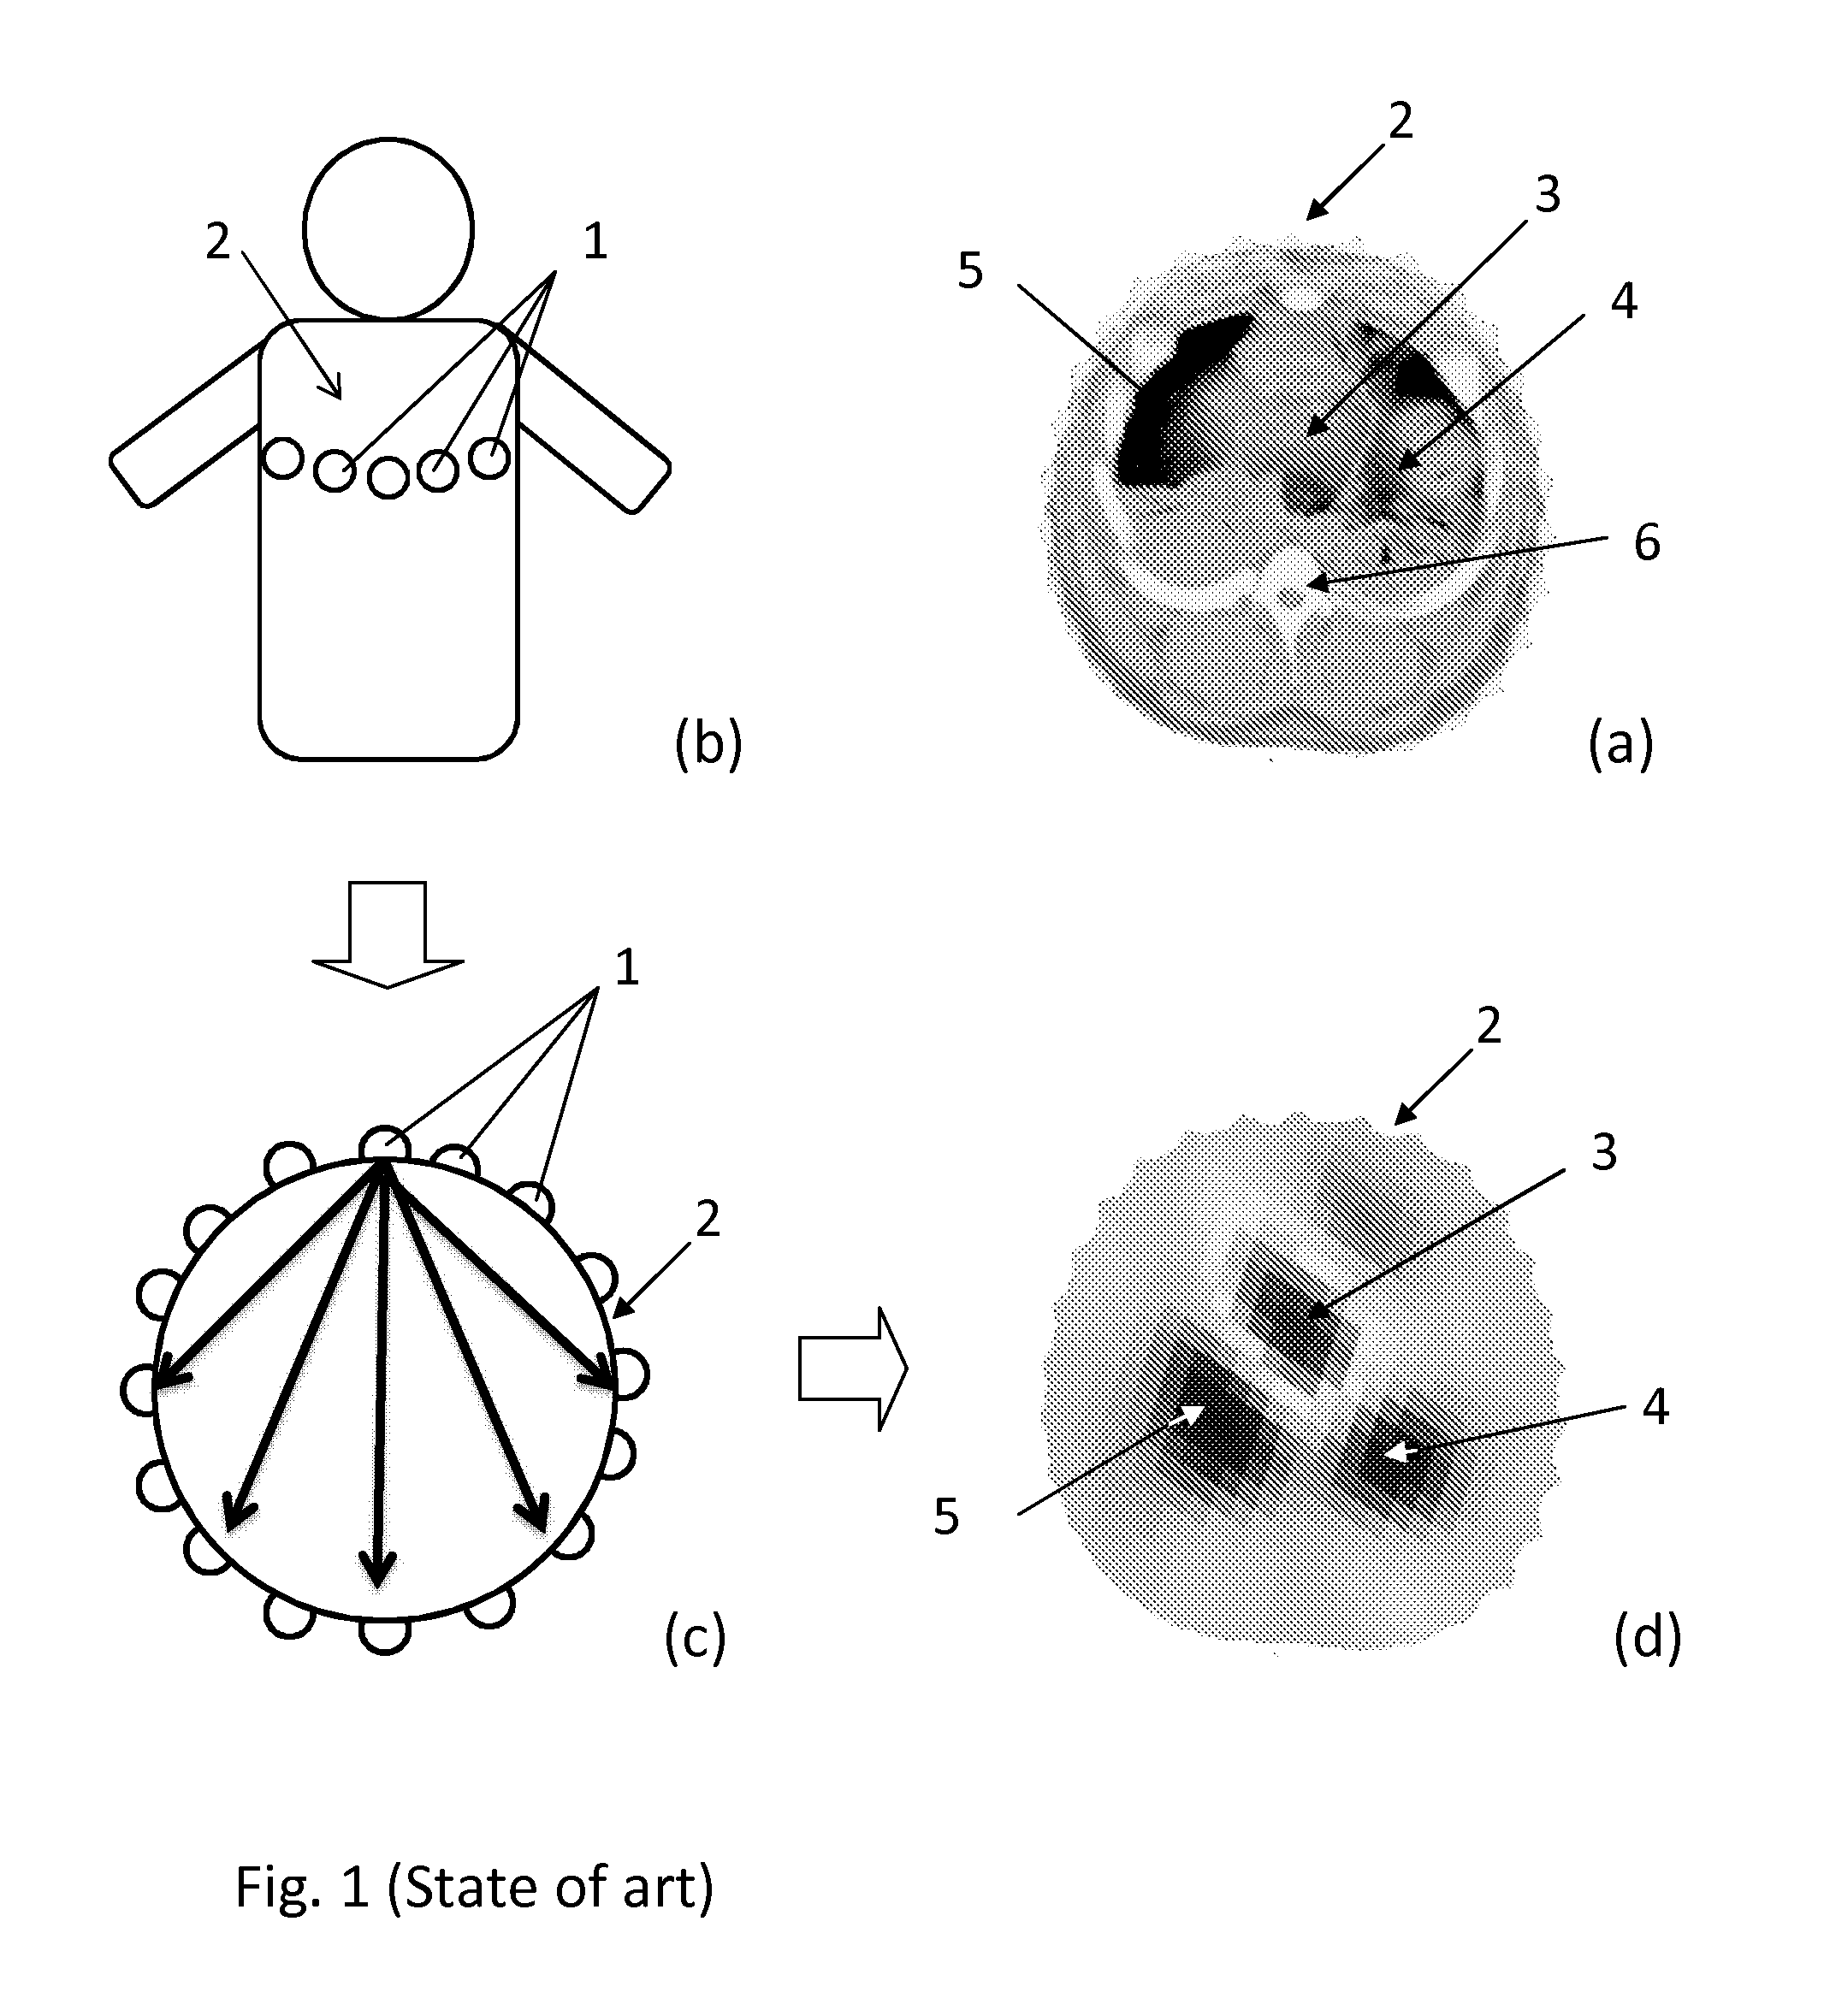 Method and Apparatus for the Non-Invasive Measurement of Pulse Transit Times (PTT)